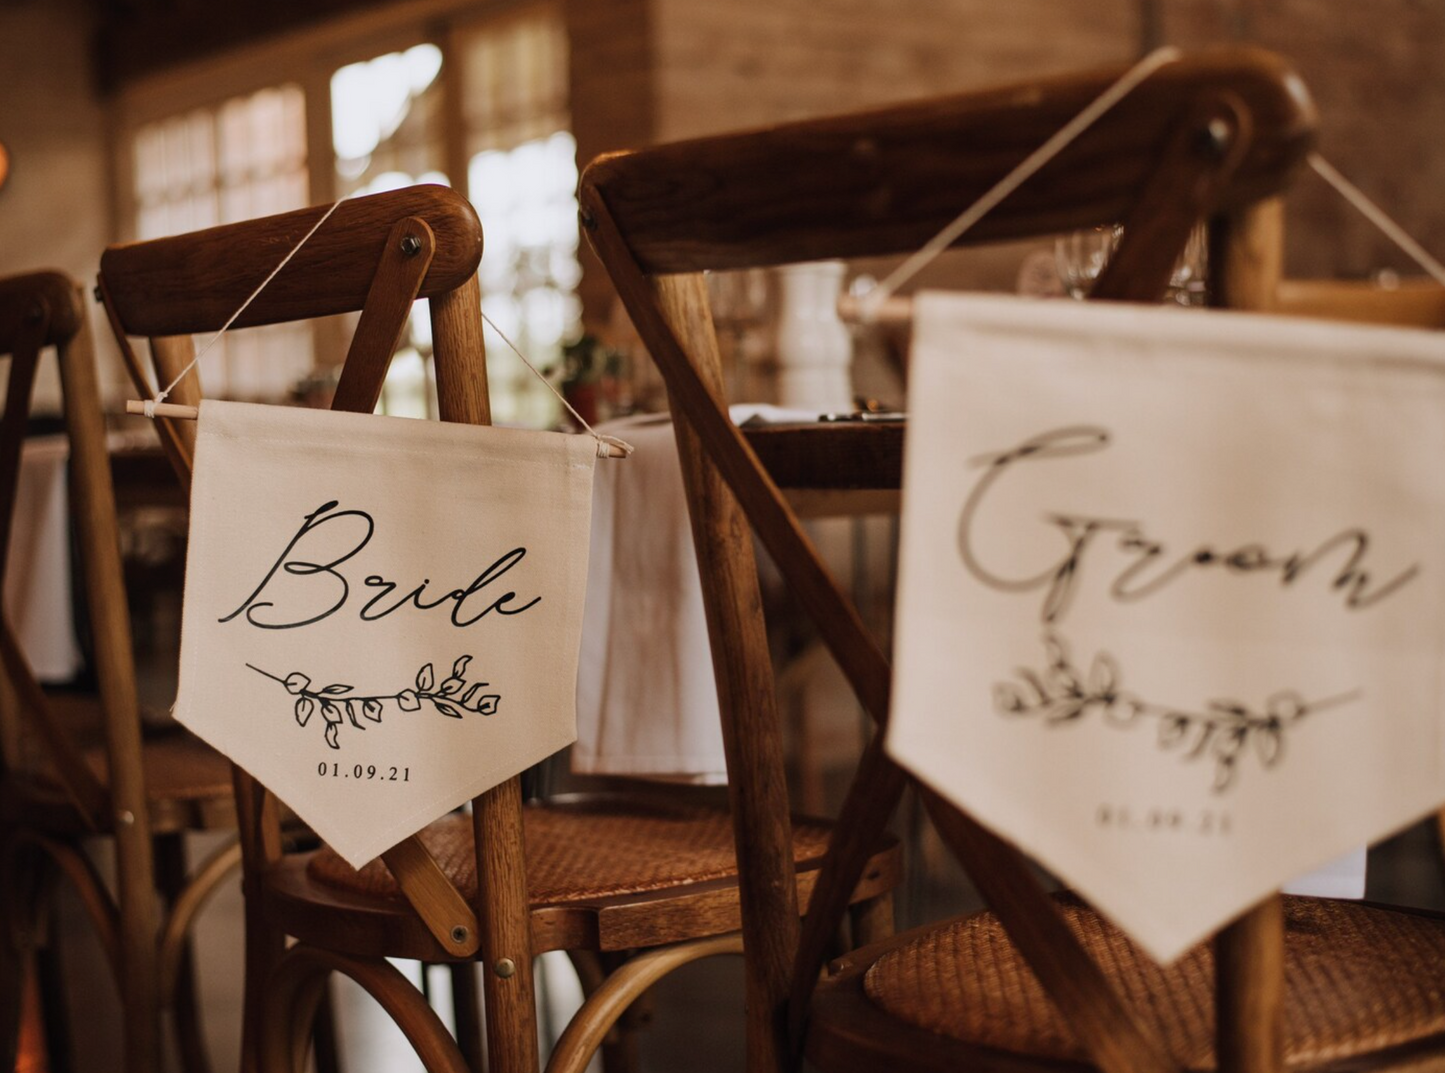 Bride and Groom wedding banner flags, wedding chair signs,